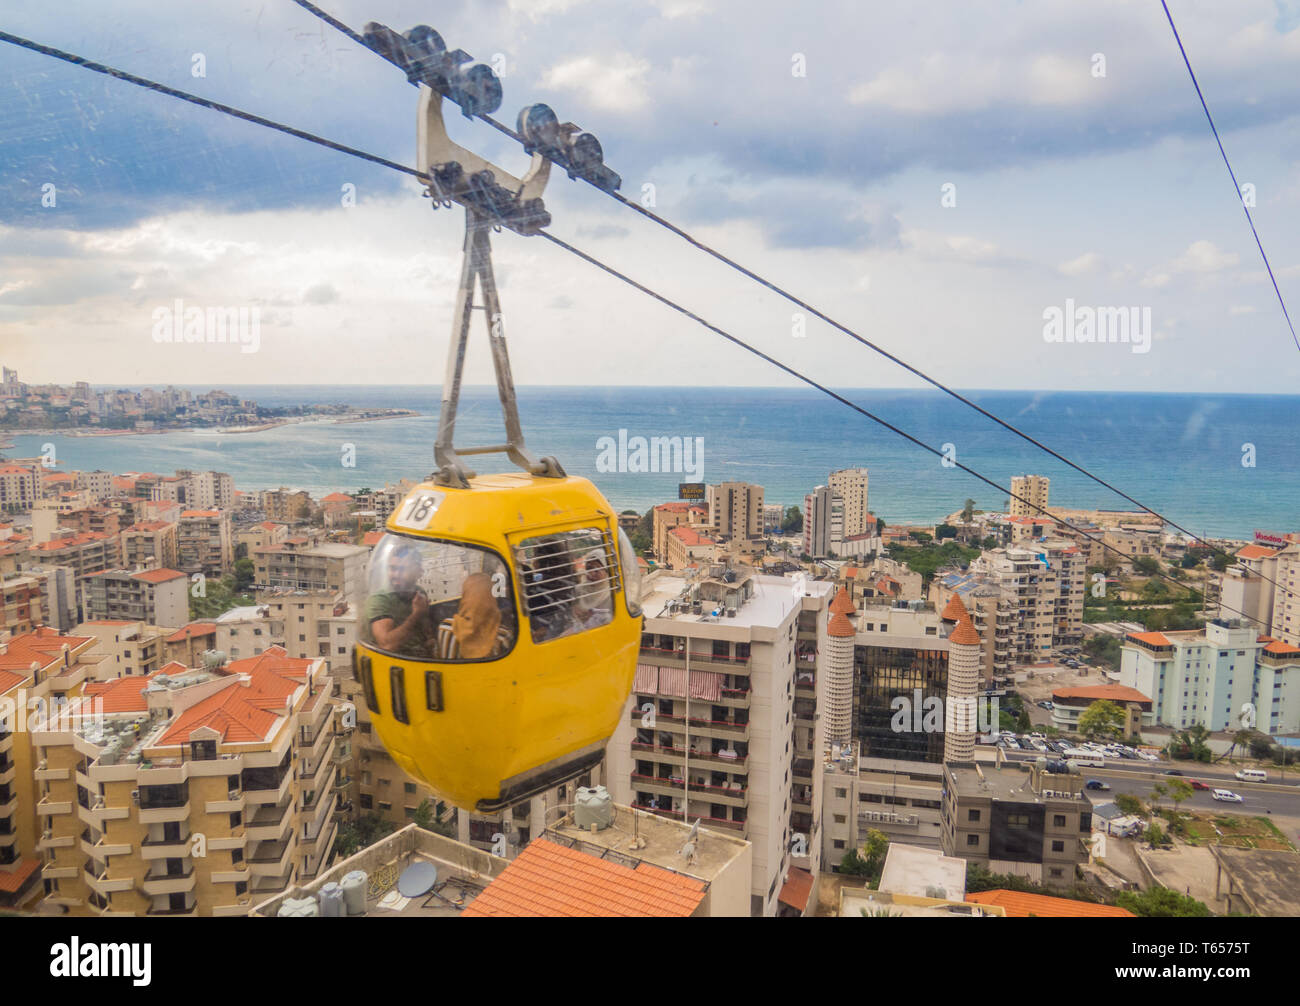 BEIRUT, LEBANON - NOVEMBER 5, 2017:   View of the Cable Car in Jounieh. Stock Photo